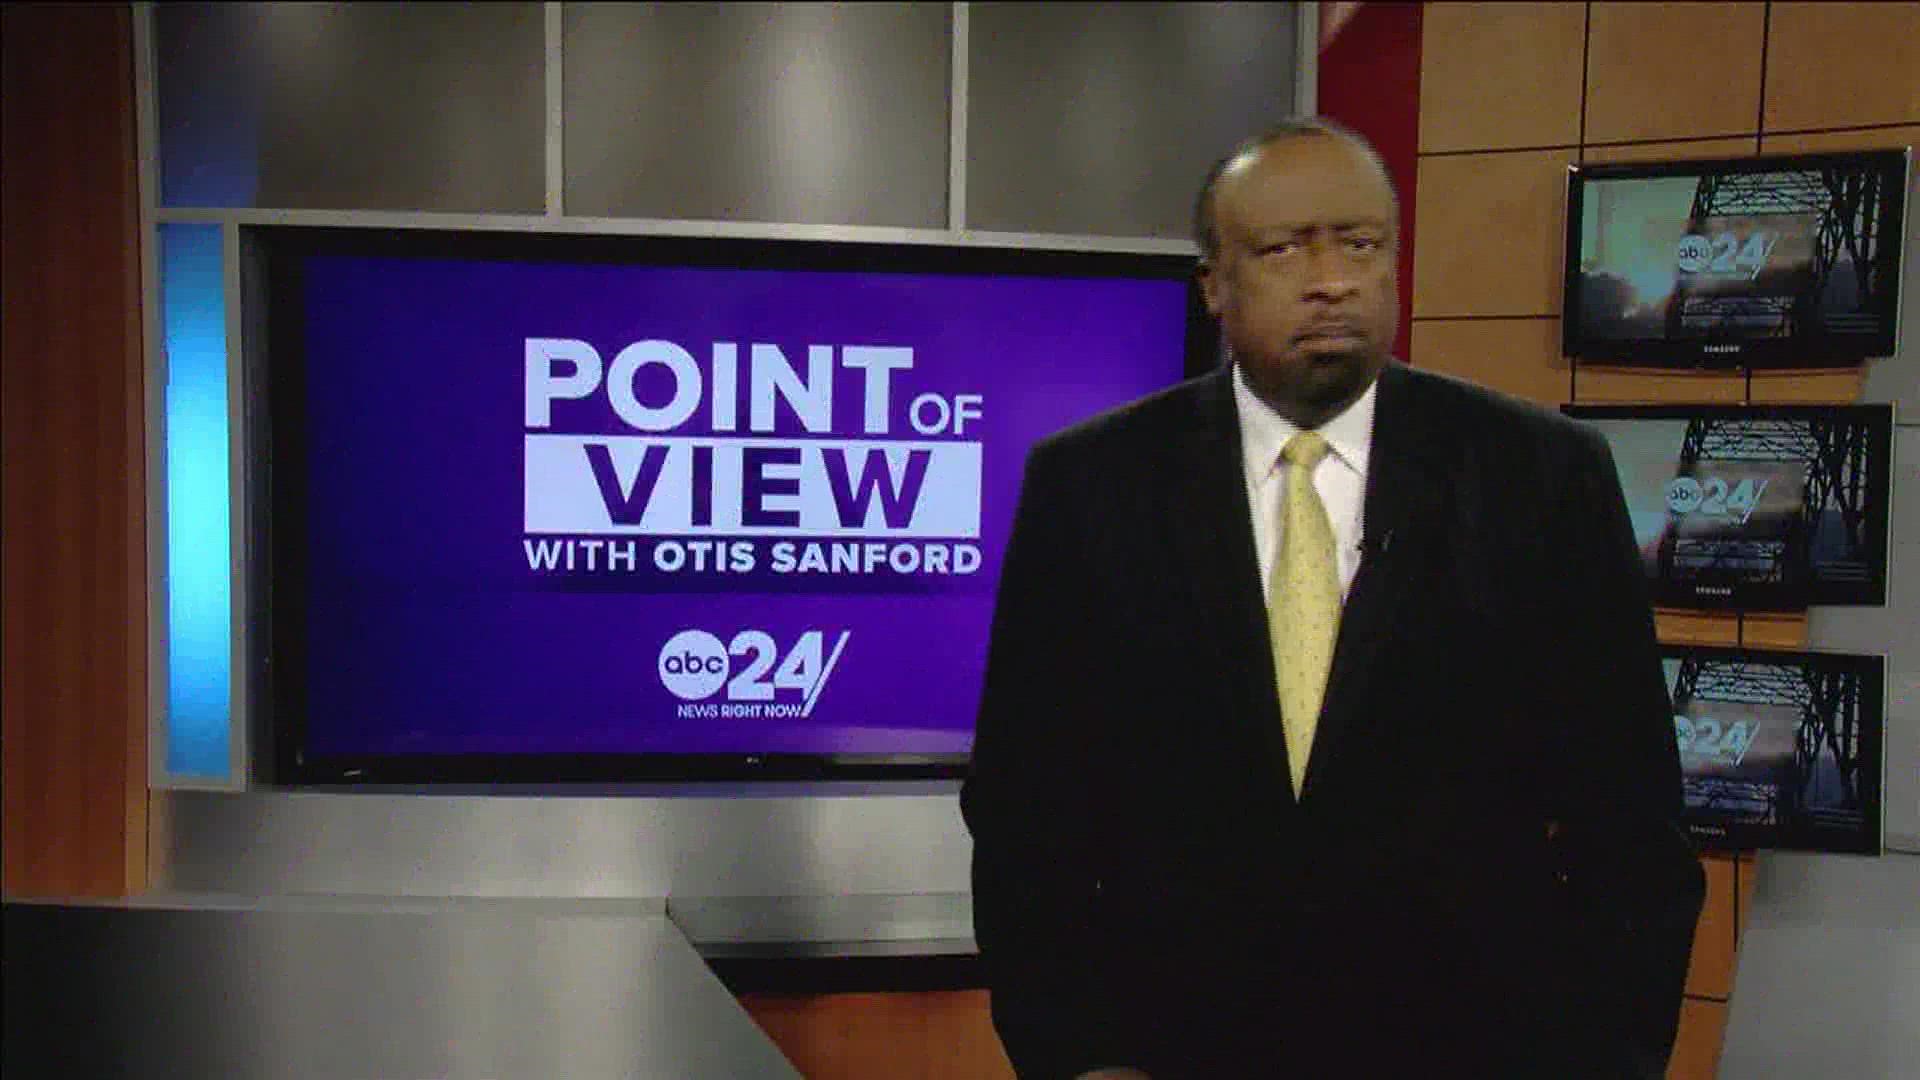 ABC 24 political analyst and commentator Otis Sanford shared his point of view on the deadly shooting during basketball games in Humboldt, Tennessee.